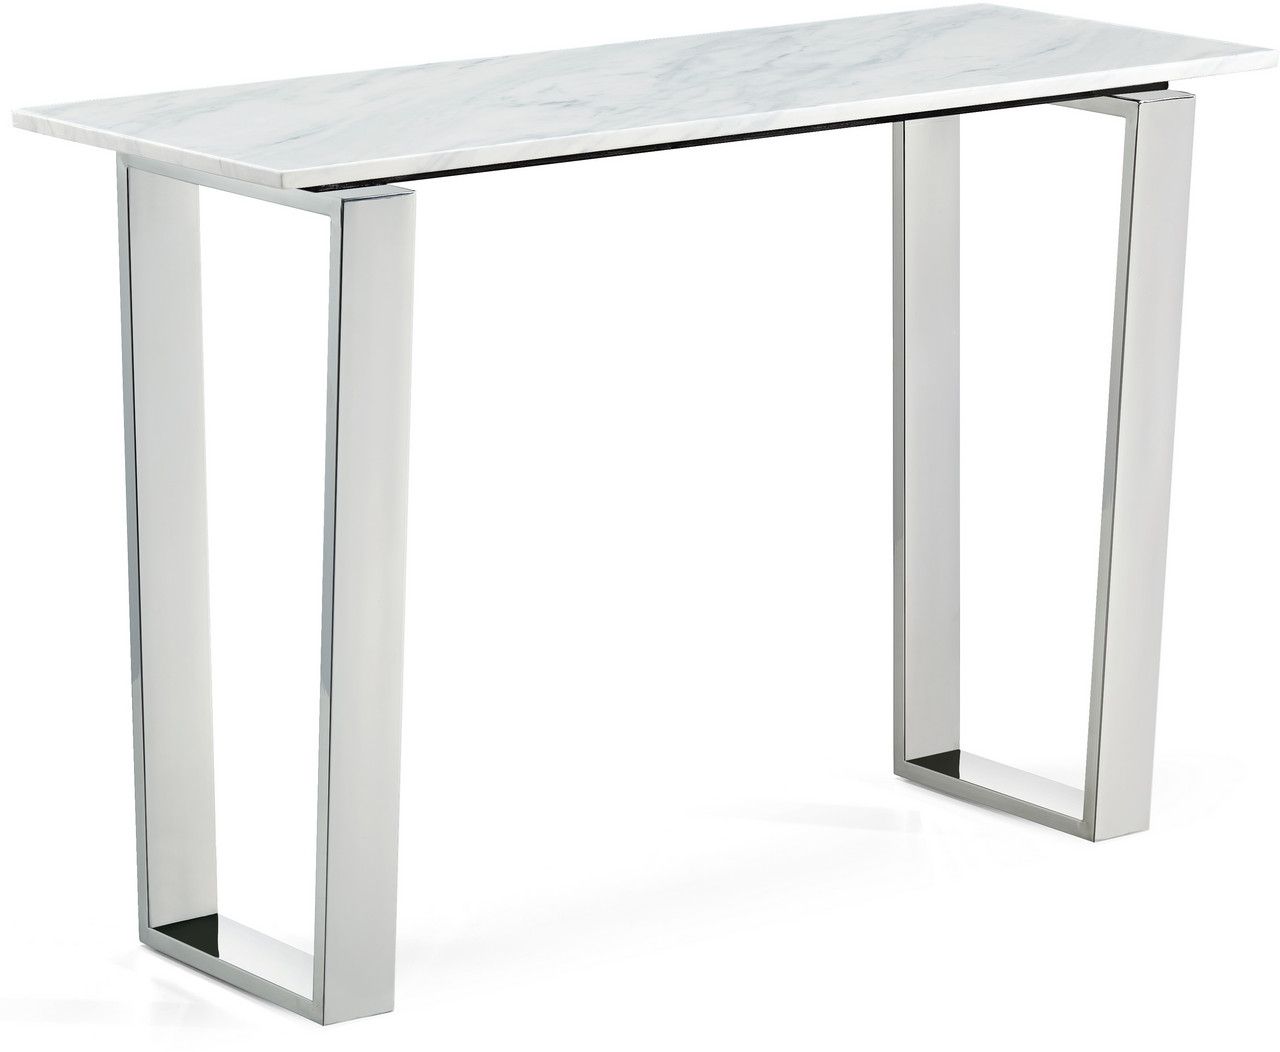 Owen Contemporary Genuine Marble Top Sofa Table W/chrome Intended For Silver Stainless Steel Console Tables (View 16 of 20)